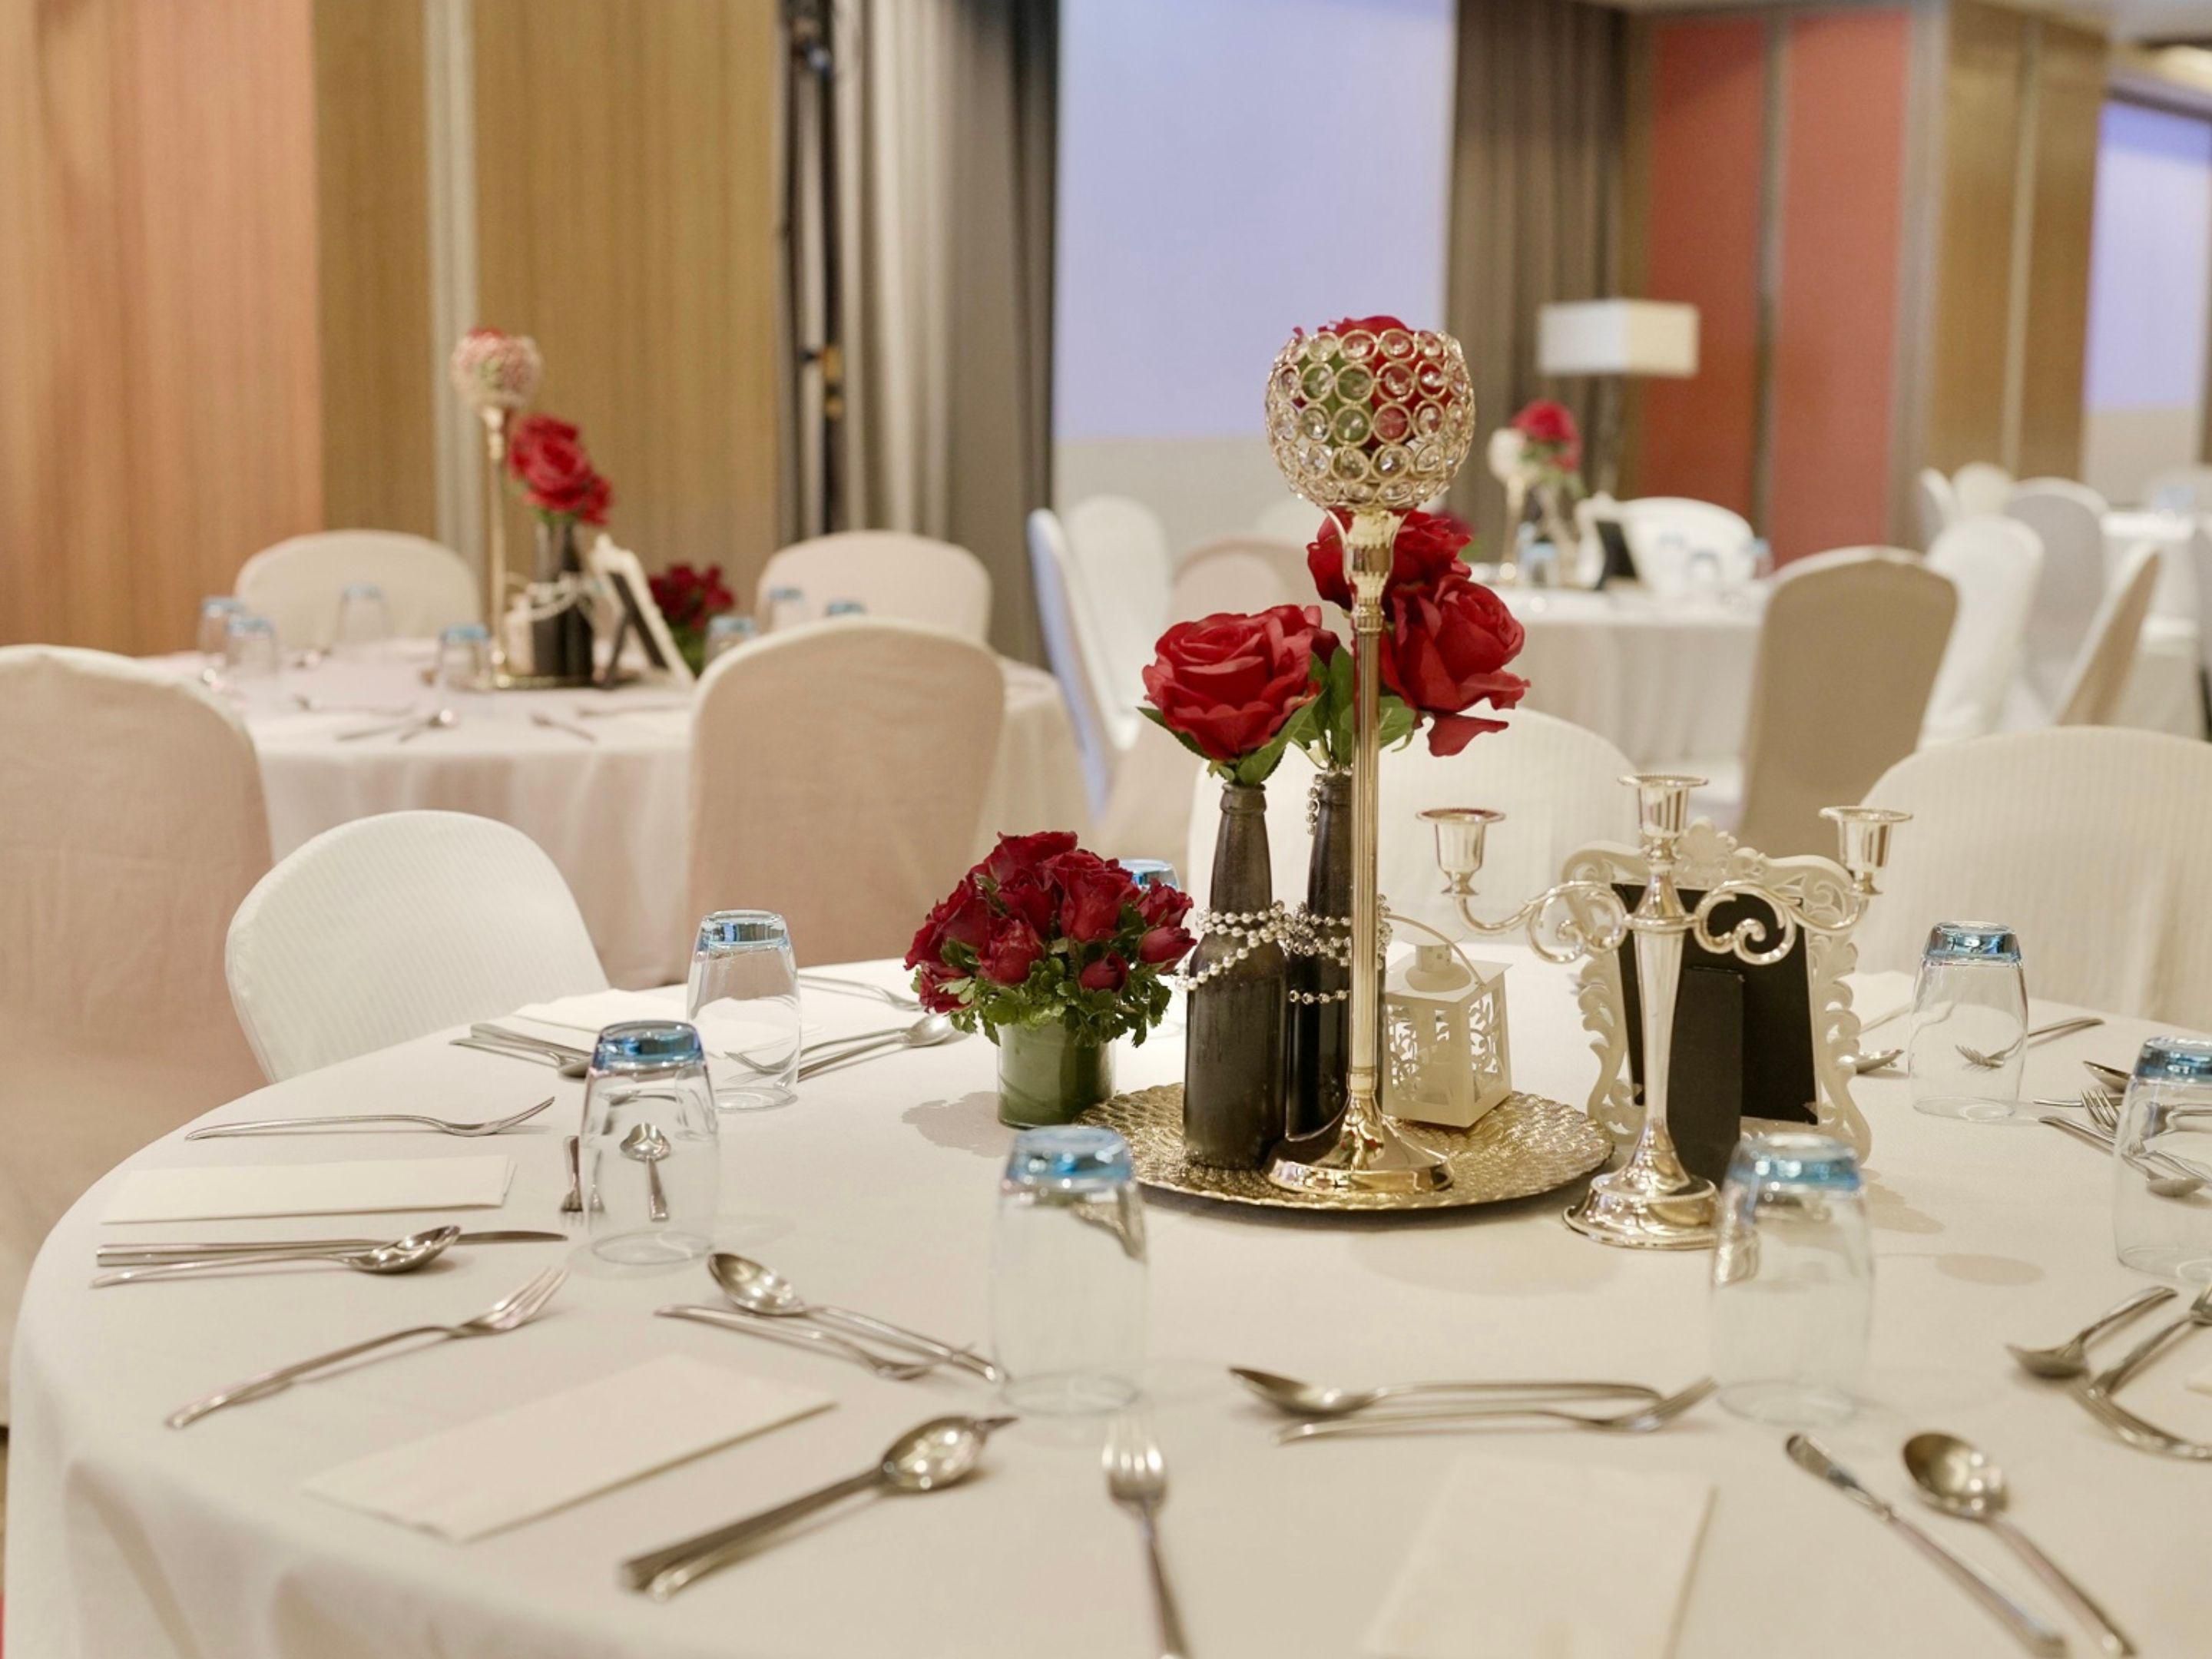 Plan your meetings and events with ease. Book any of Holiday Inn & Suites Makati's eight fully-equipped function rooms for your next event.